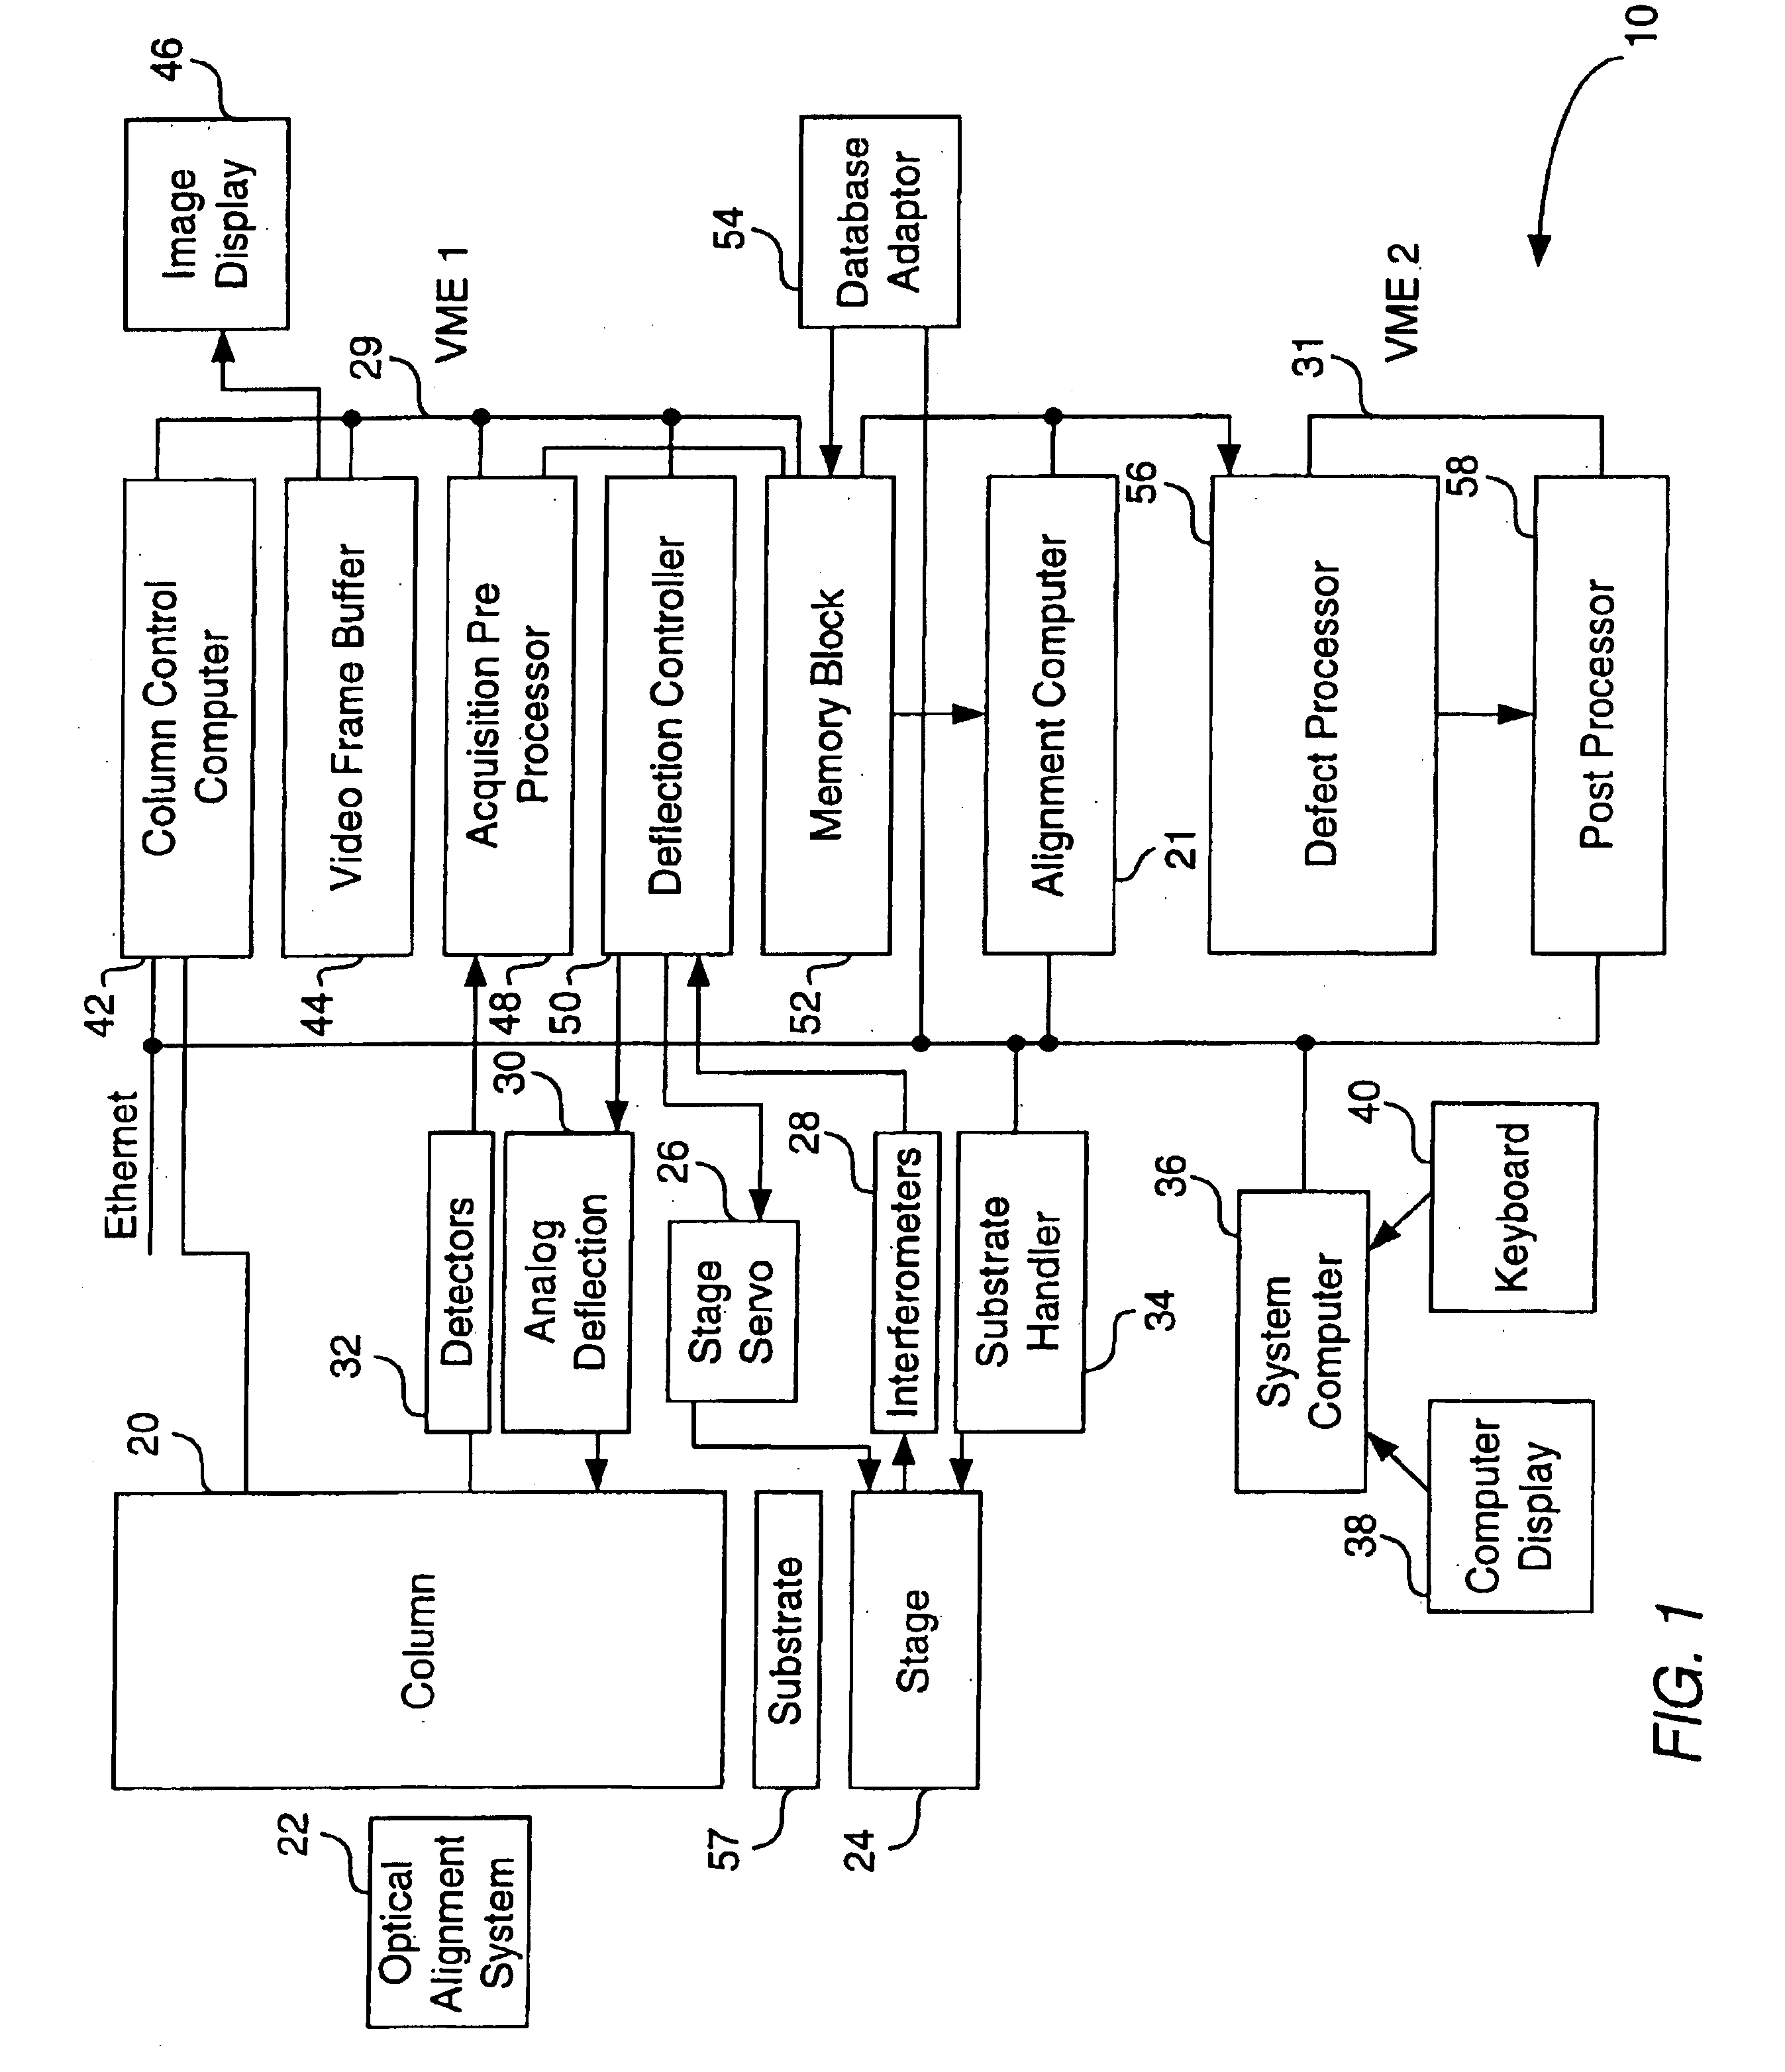 Multi-pixel methods and apparatus for analysis of defect information from test structures on semiconductor devices